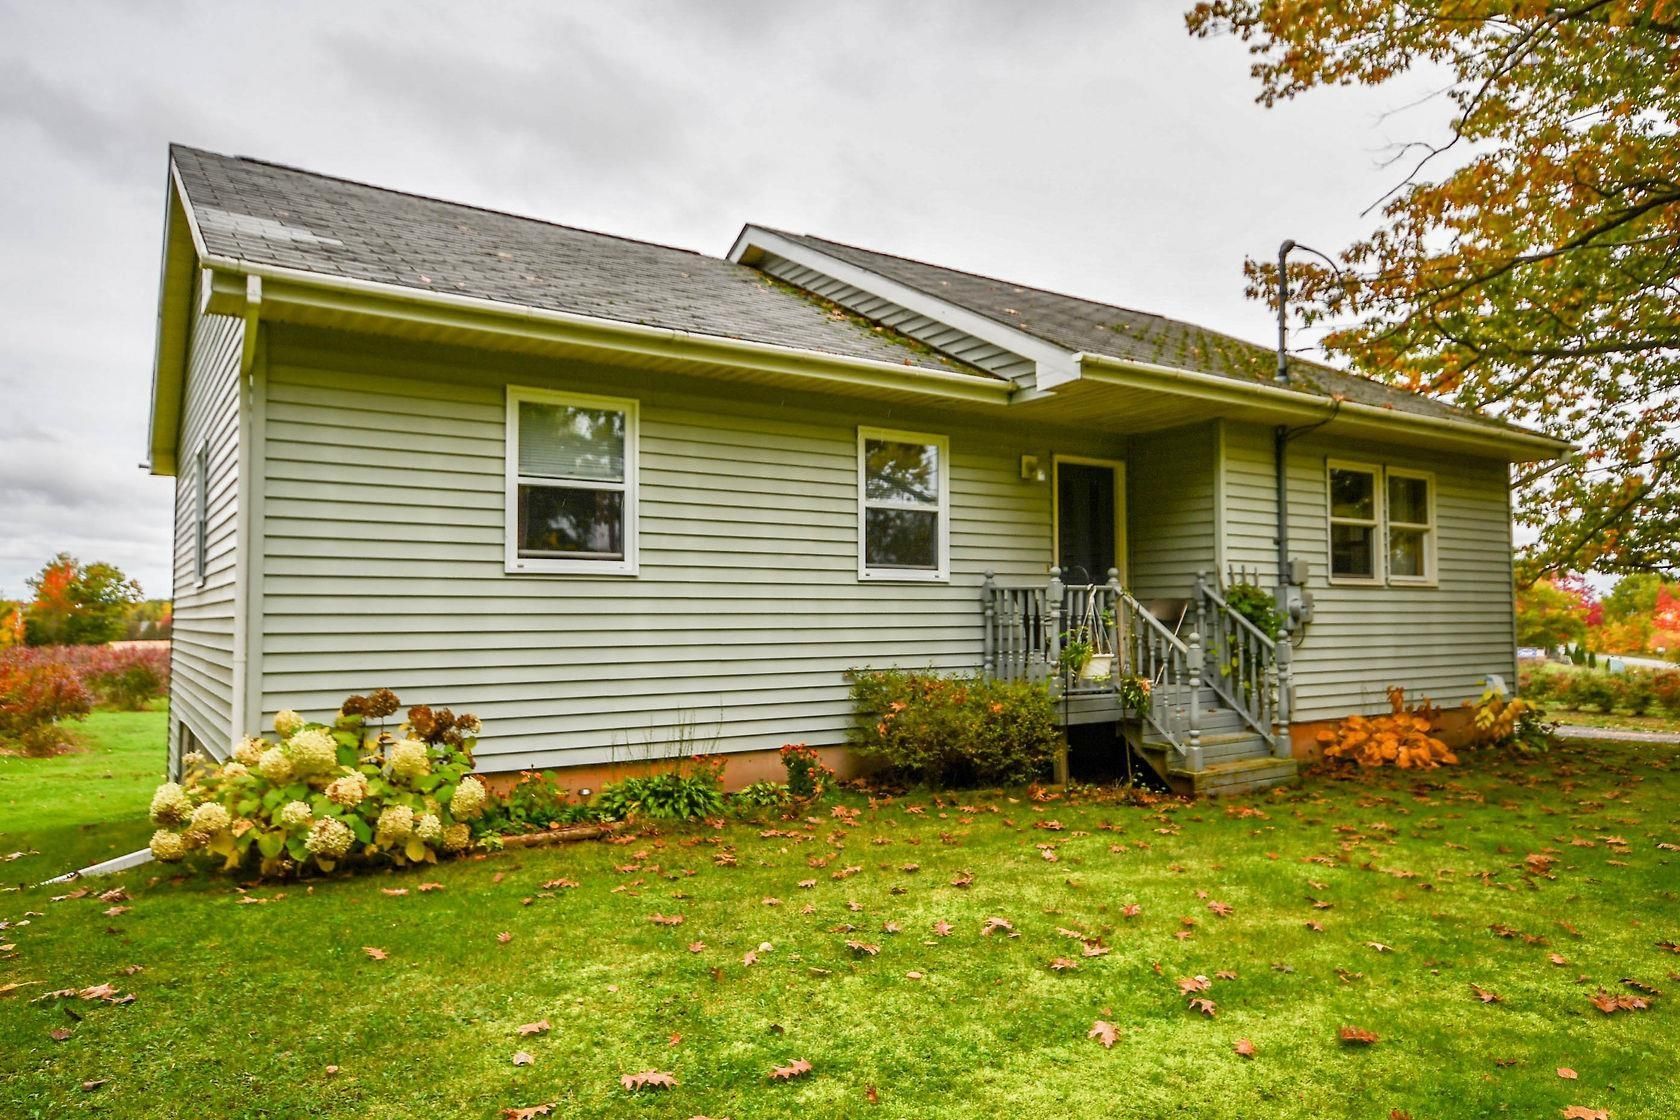 Main Photo: 1235 Sherman Belcher Road in Centreville: 404-Kings County Residential for sale (Annapolis Valley)  : MLS®# 202200800